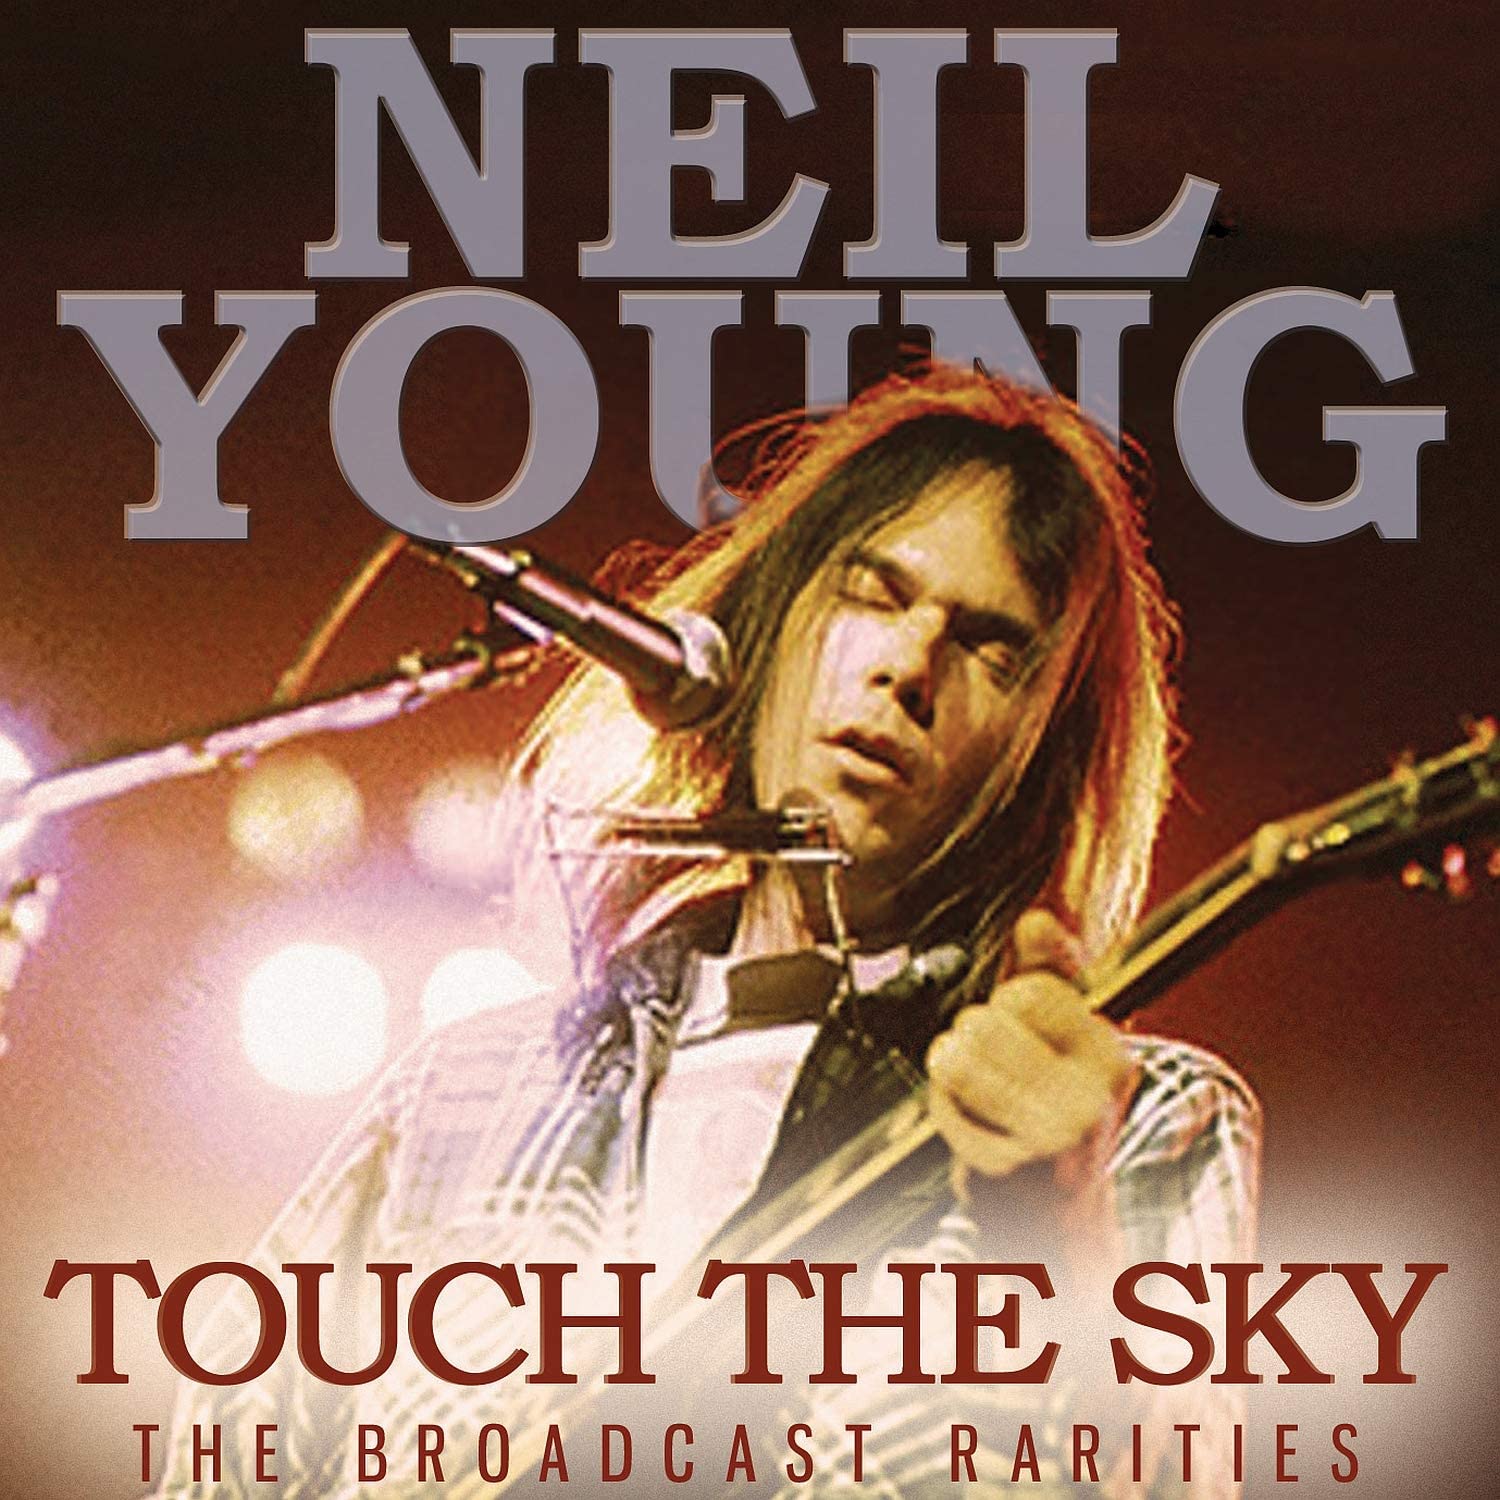 Neil Young – Touch The Sky (2020) (ALBUM ZIP)